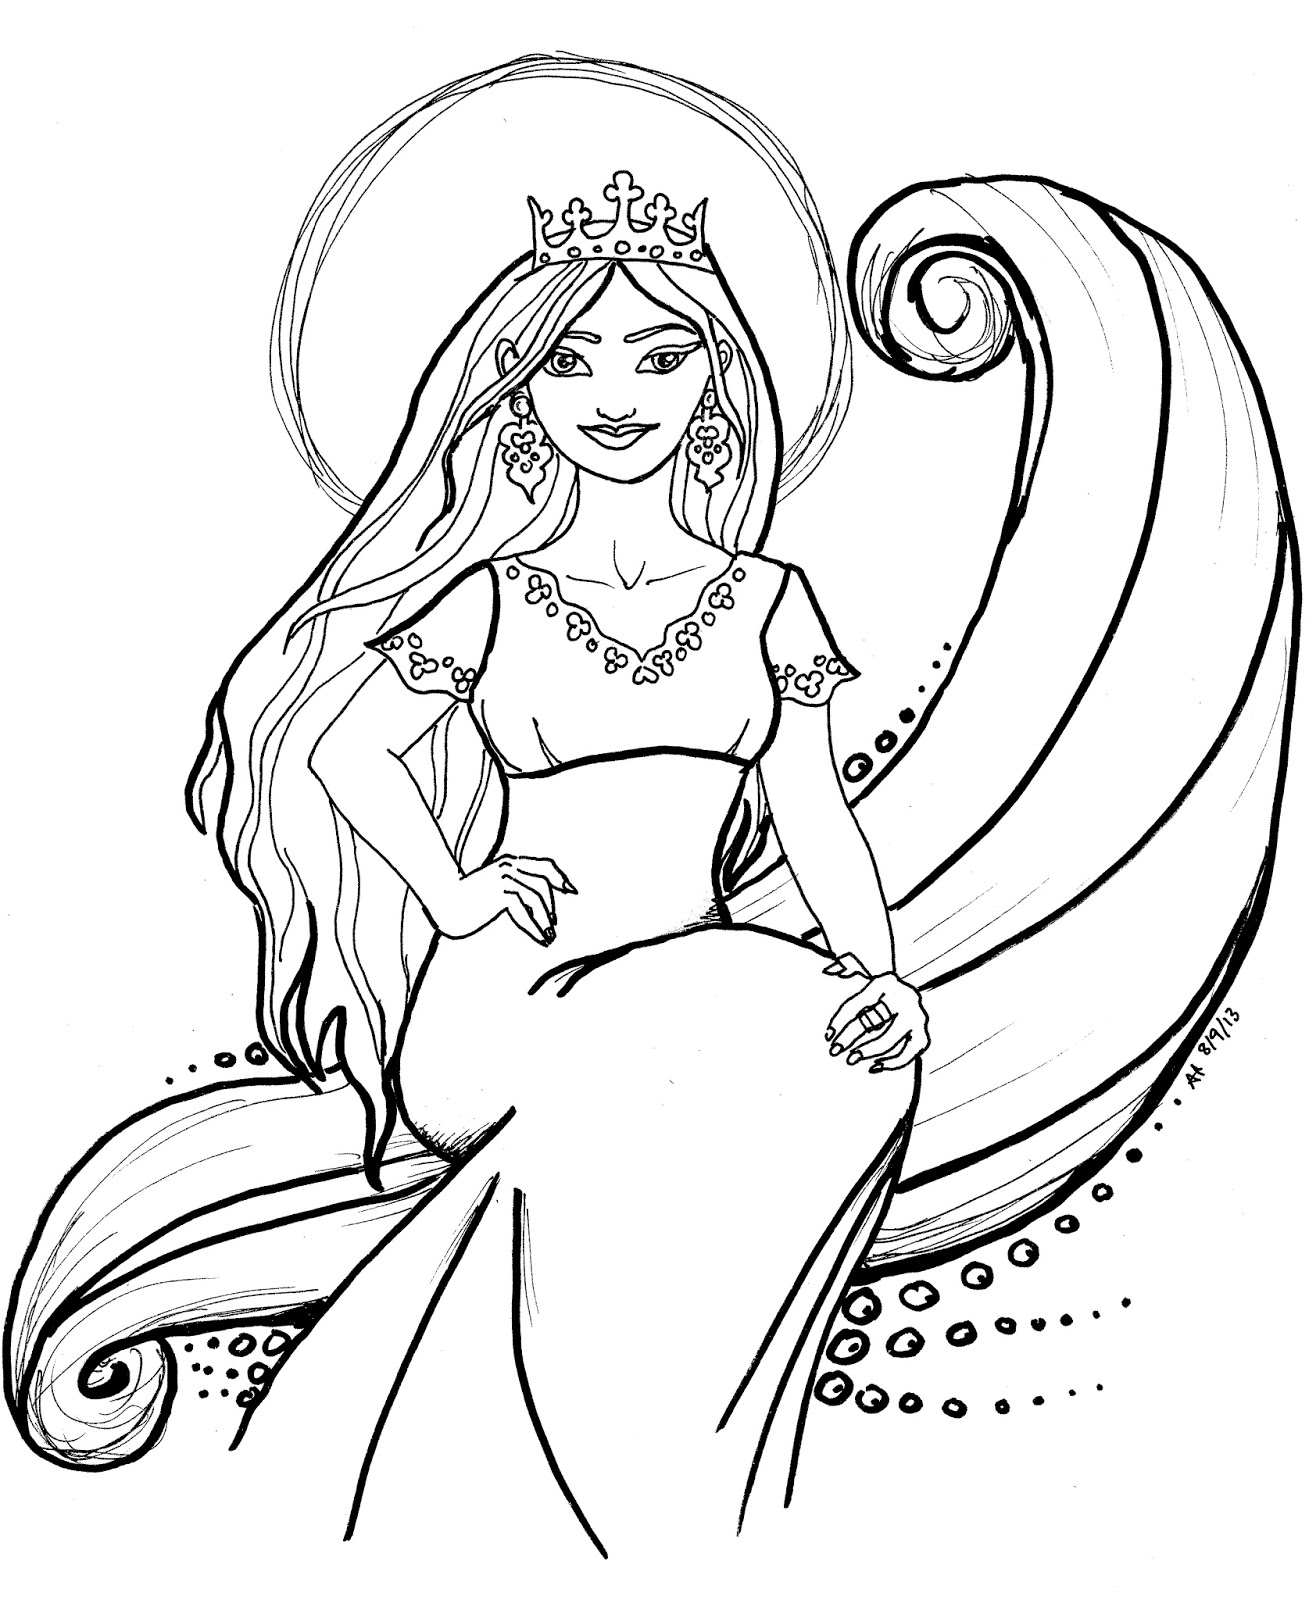 (free!) Original Coloring Pages: August 2013